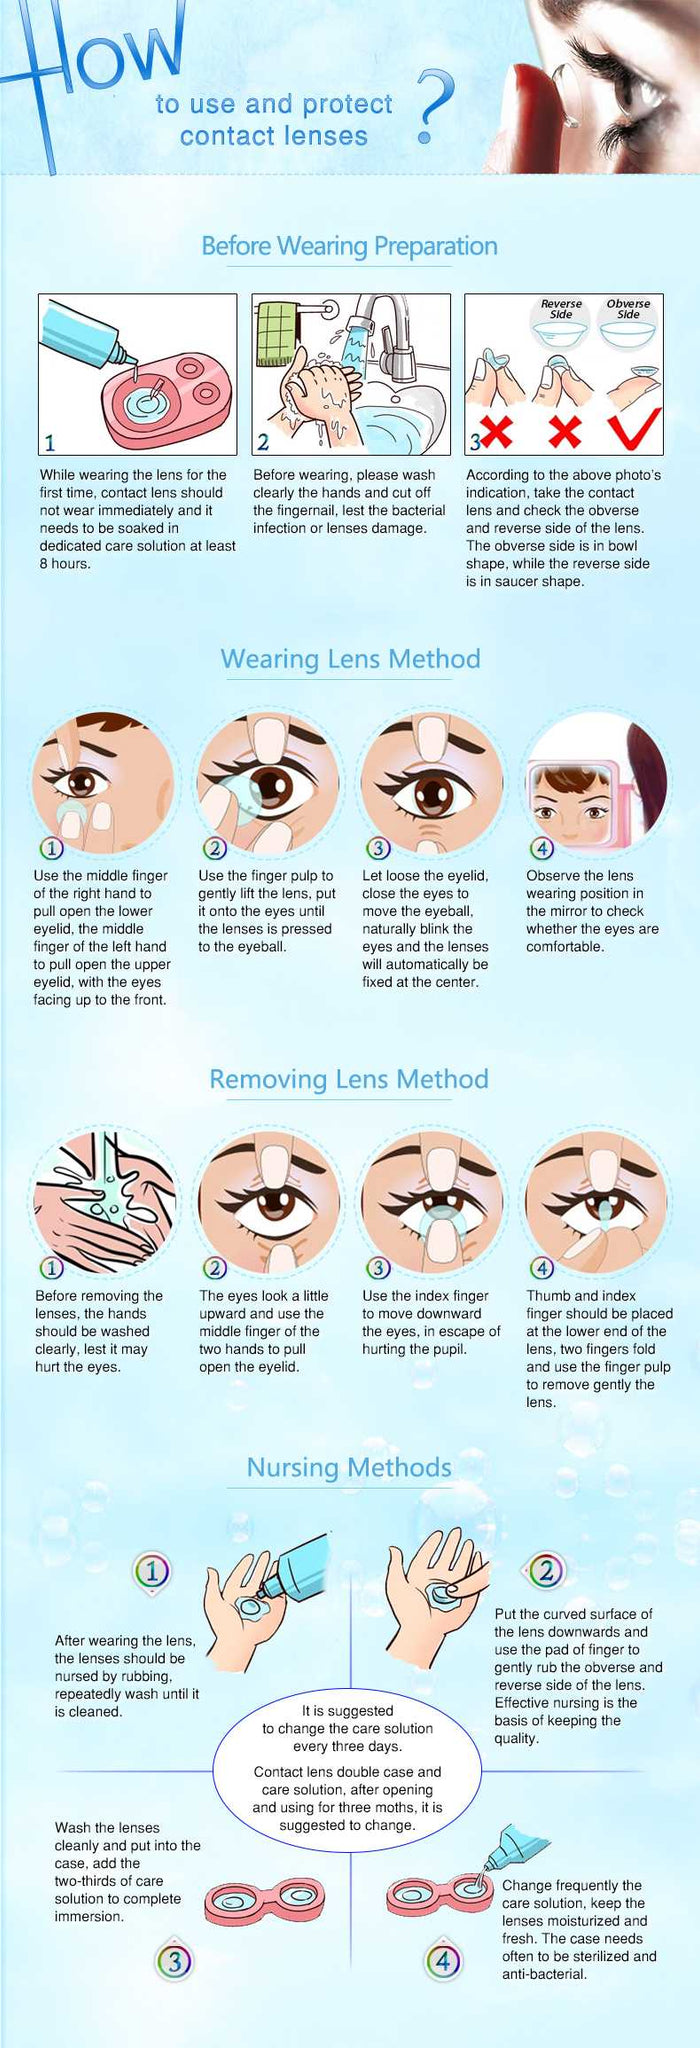 How to Use and Protect Contact Lenses